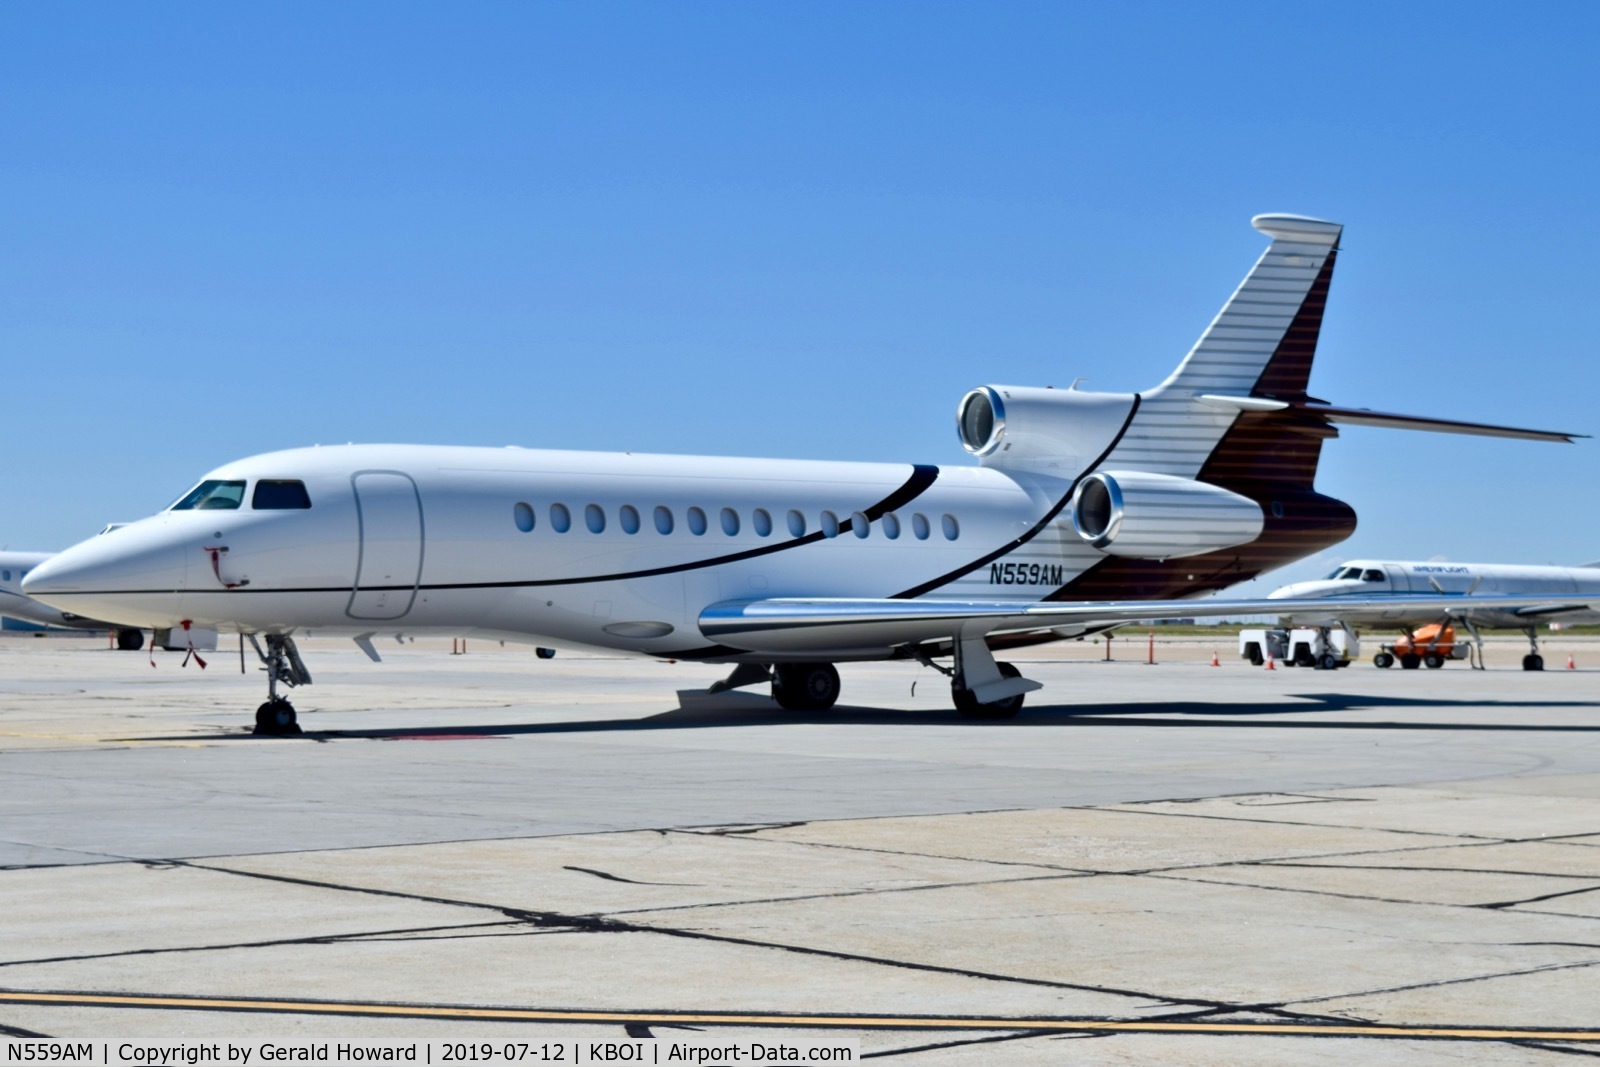 N559AM, 2013 Dassault Falcon 7X C/N 206, Parked on the south GA ramp.